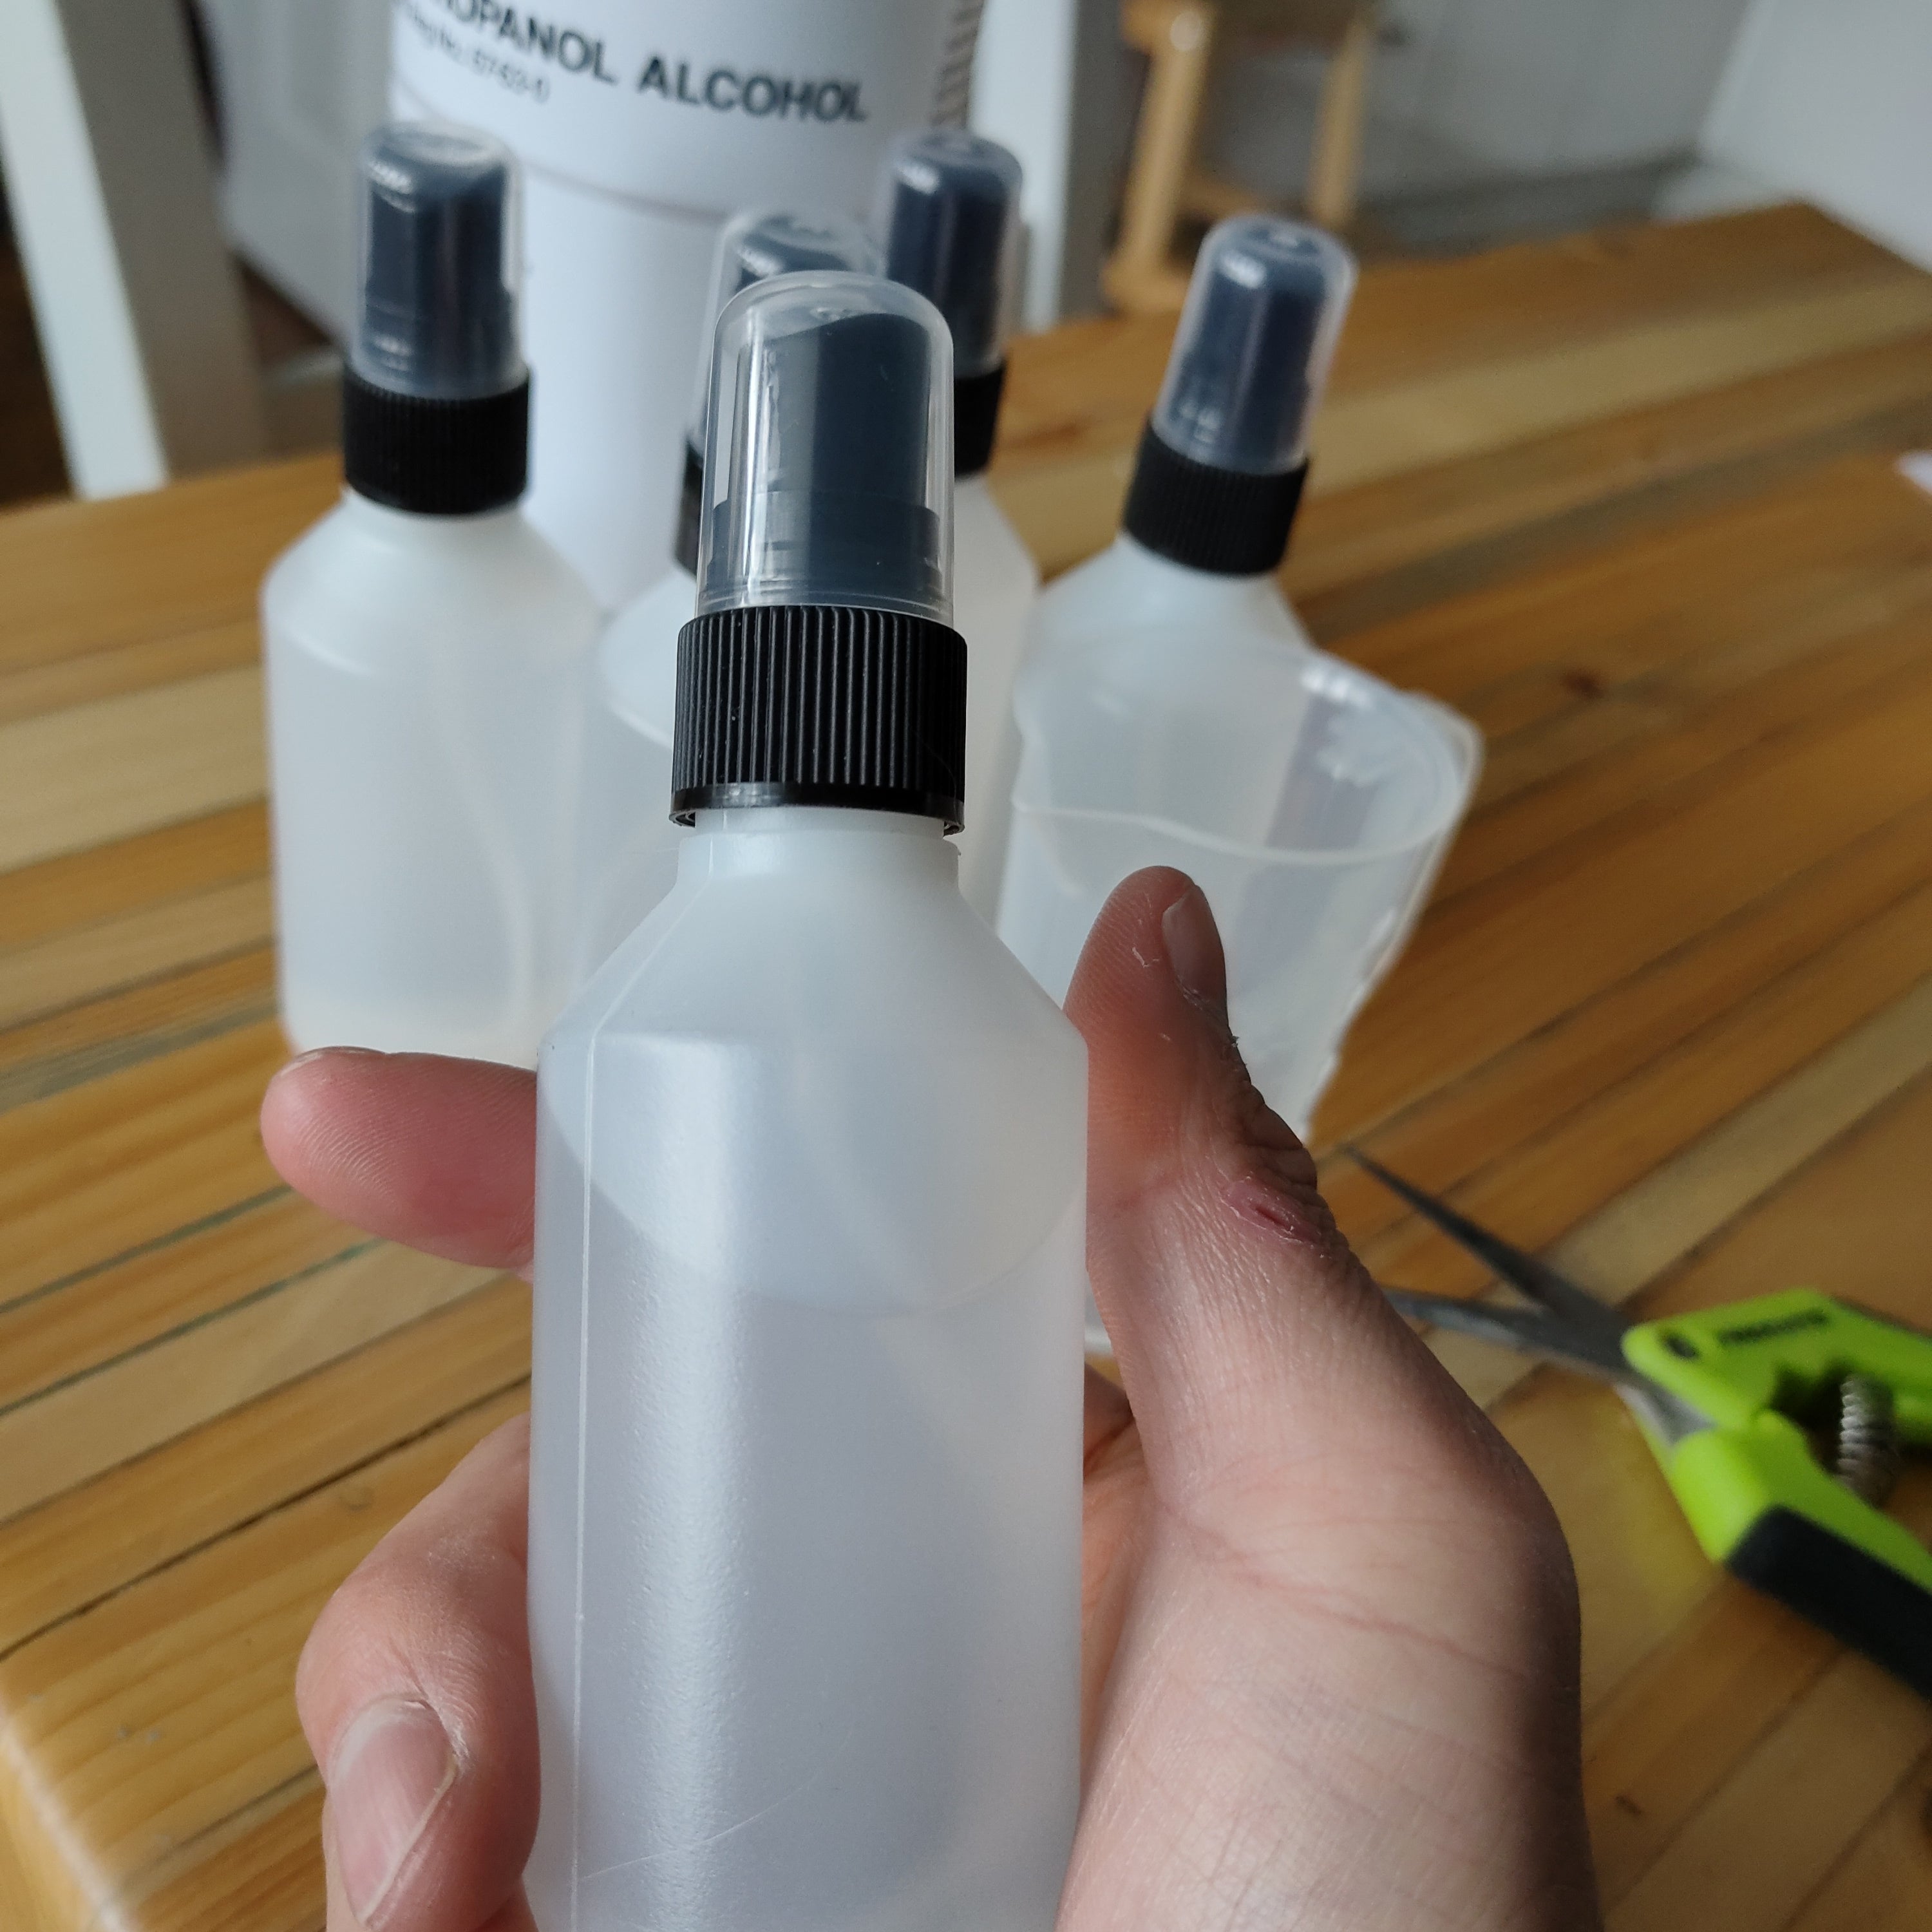 Trimming, Drying & Curing Isopropanol Alcohol 99.9% - 100ml Spray